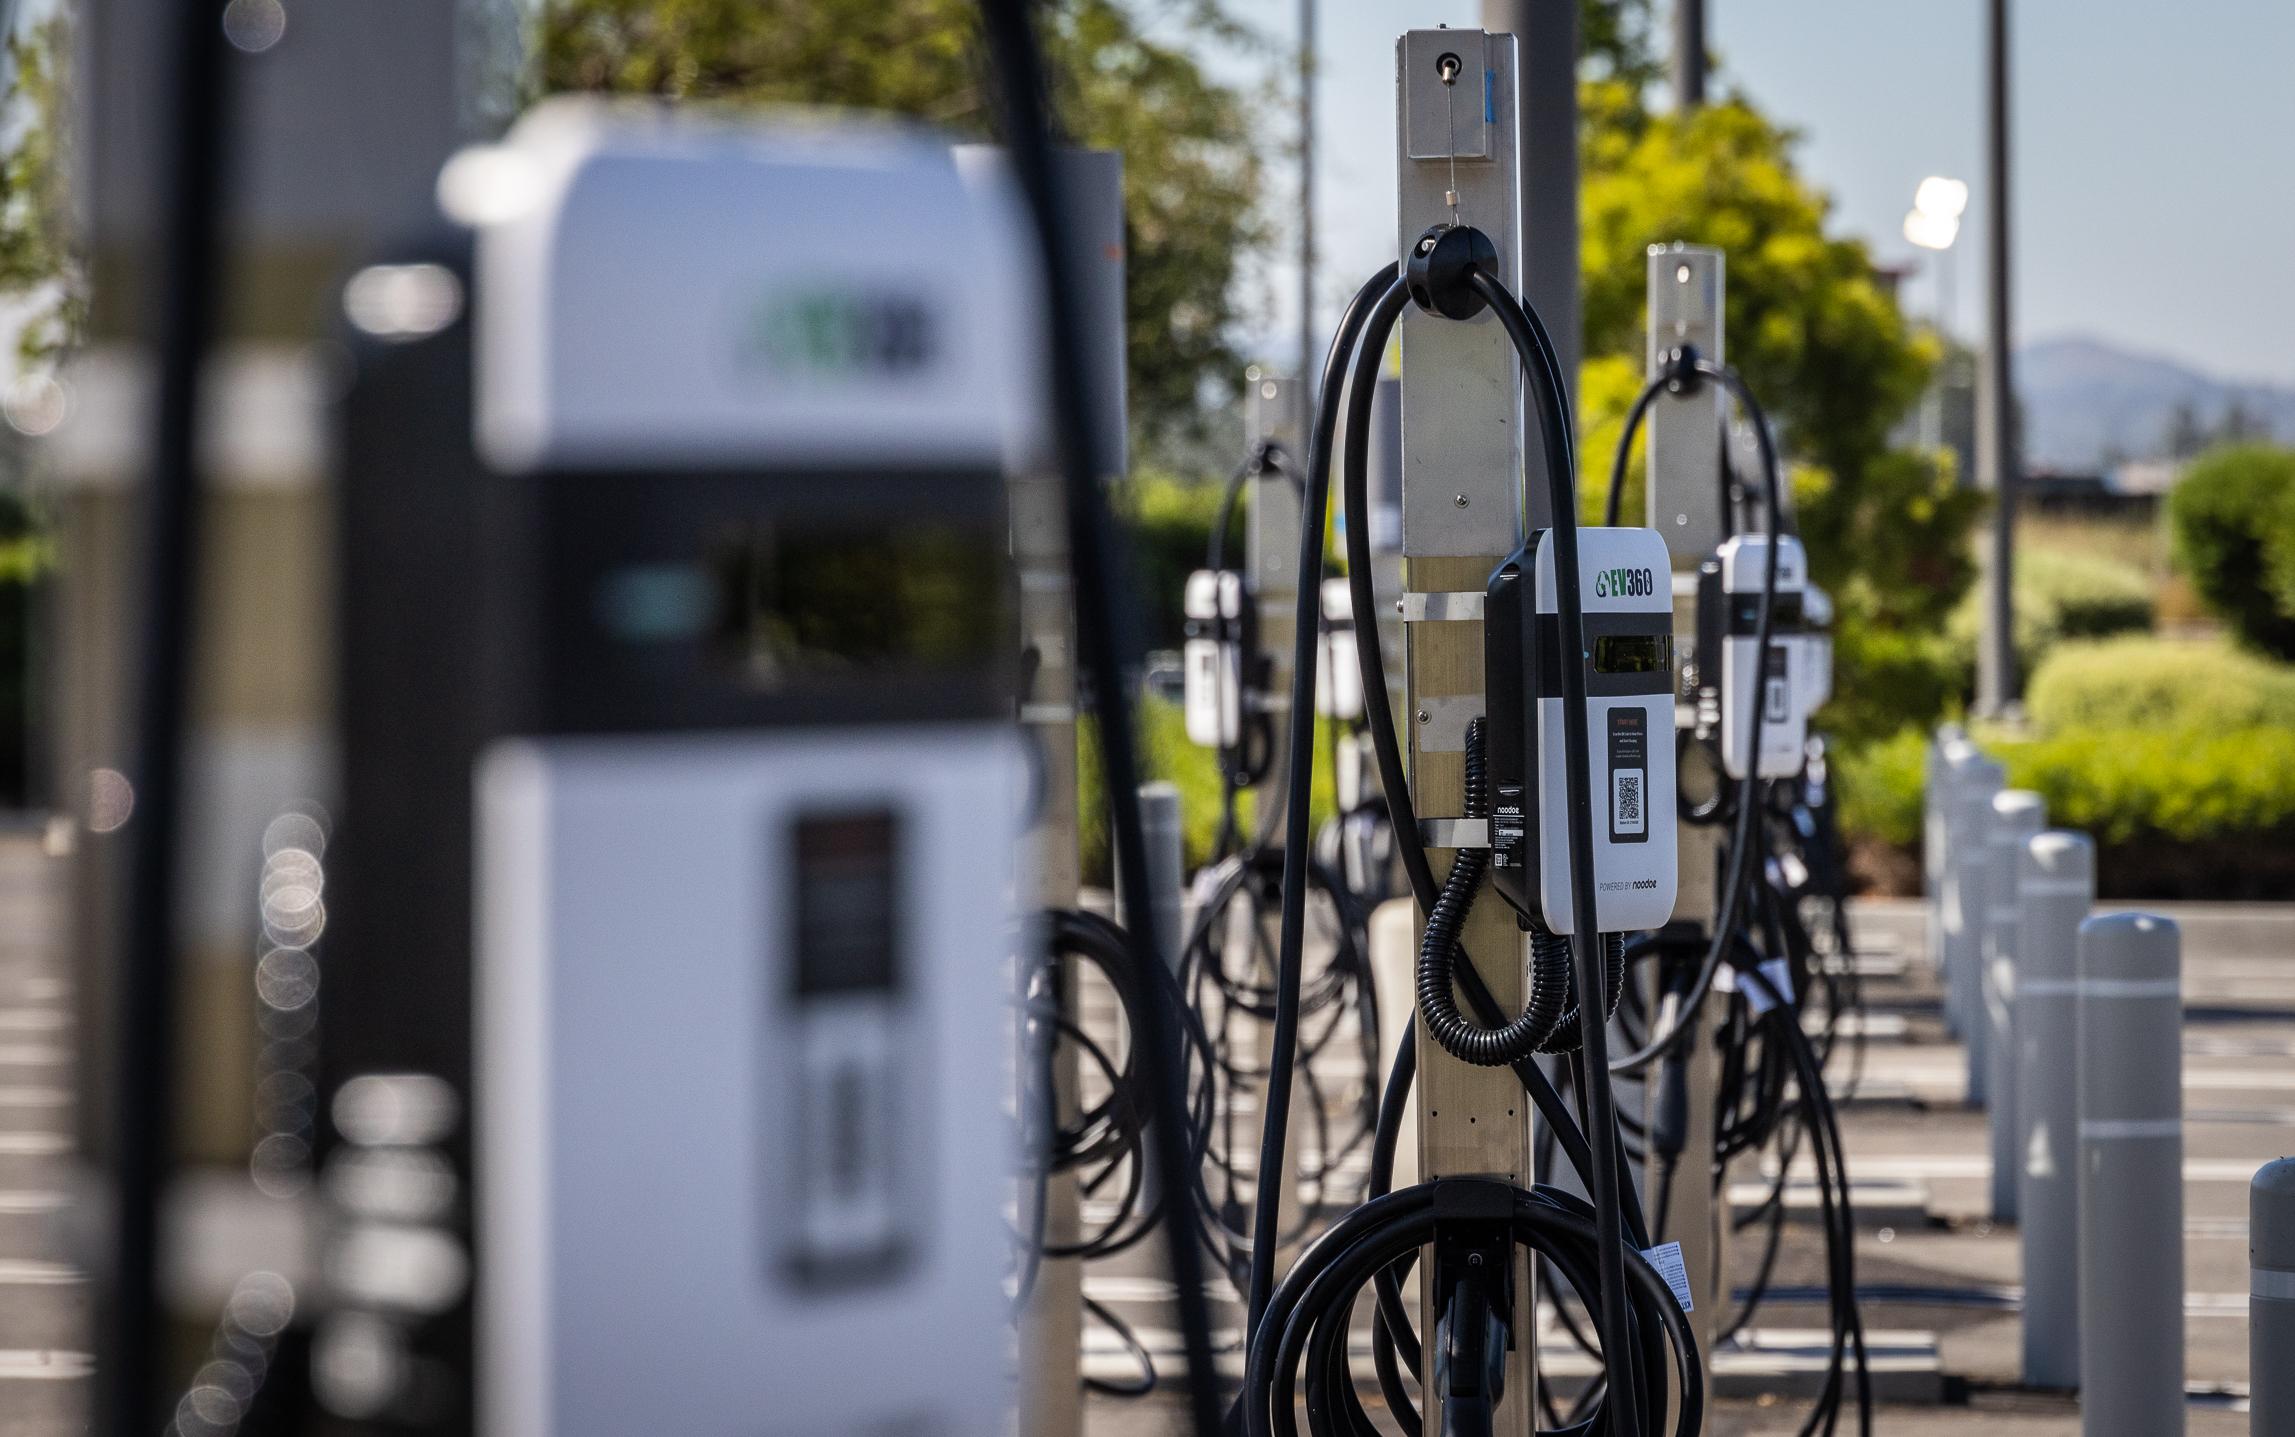 166 New Electric Vehicle Chargers Installed at Irvine’s Great Park